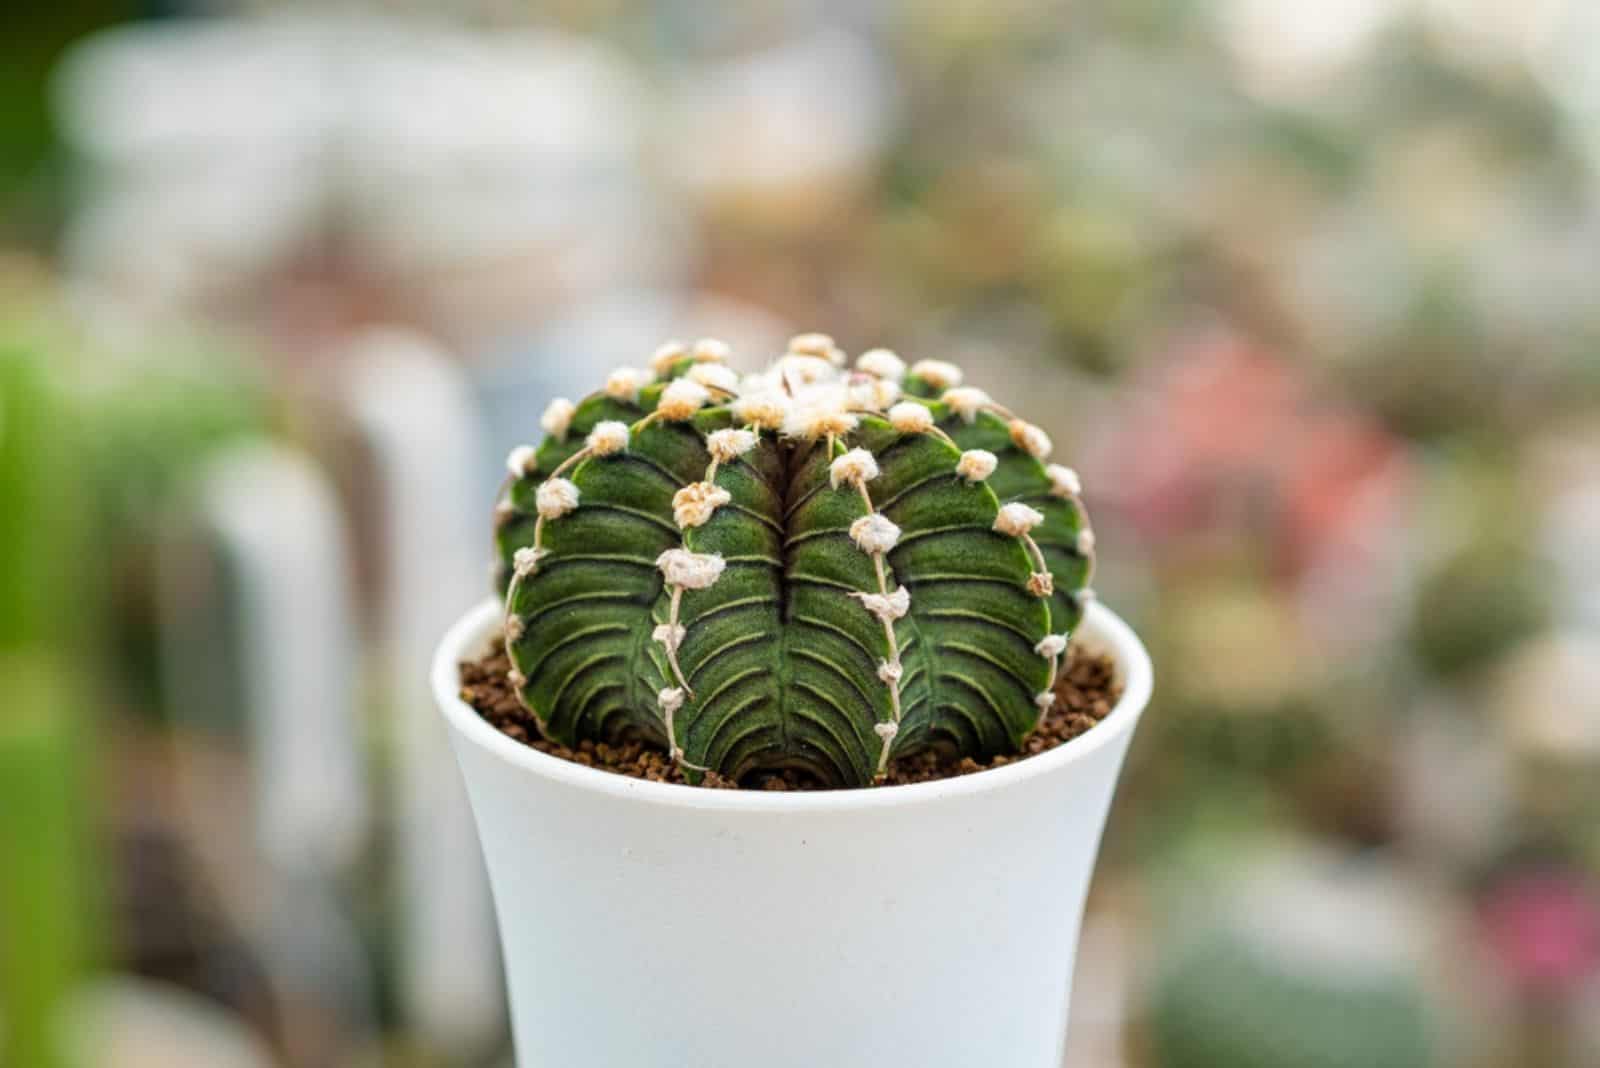 cactus in a white pot in the light